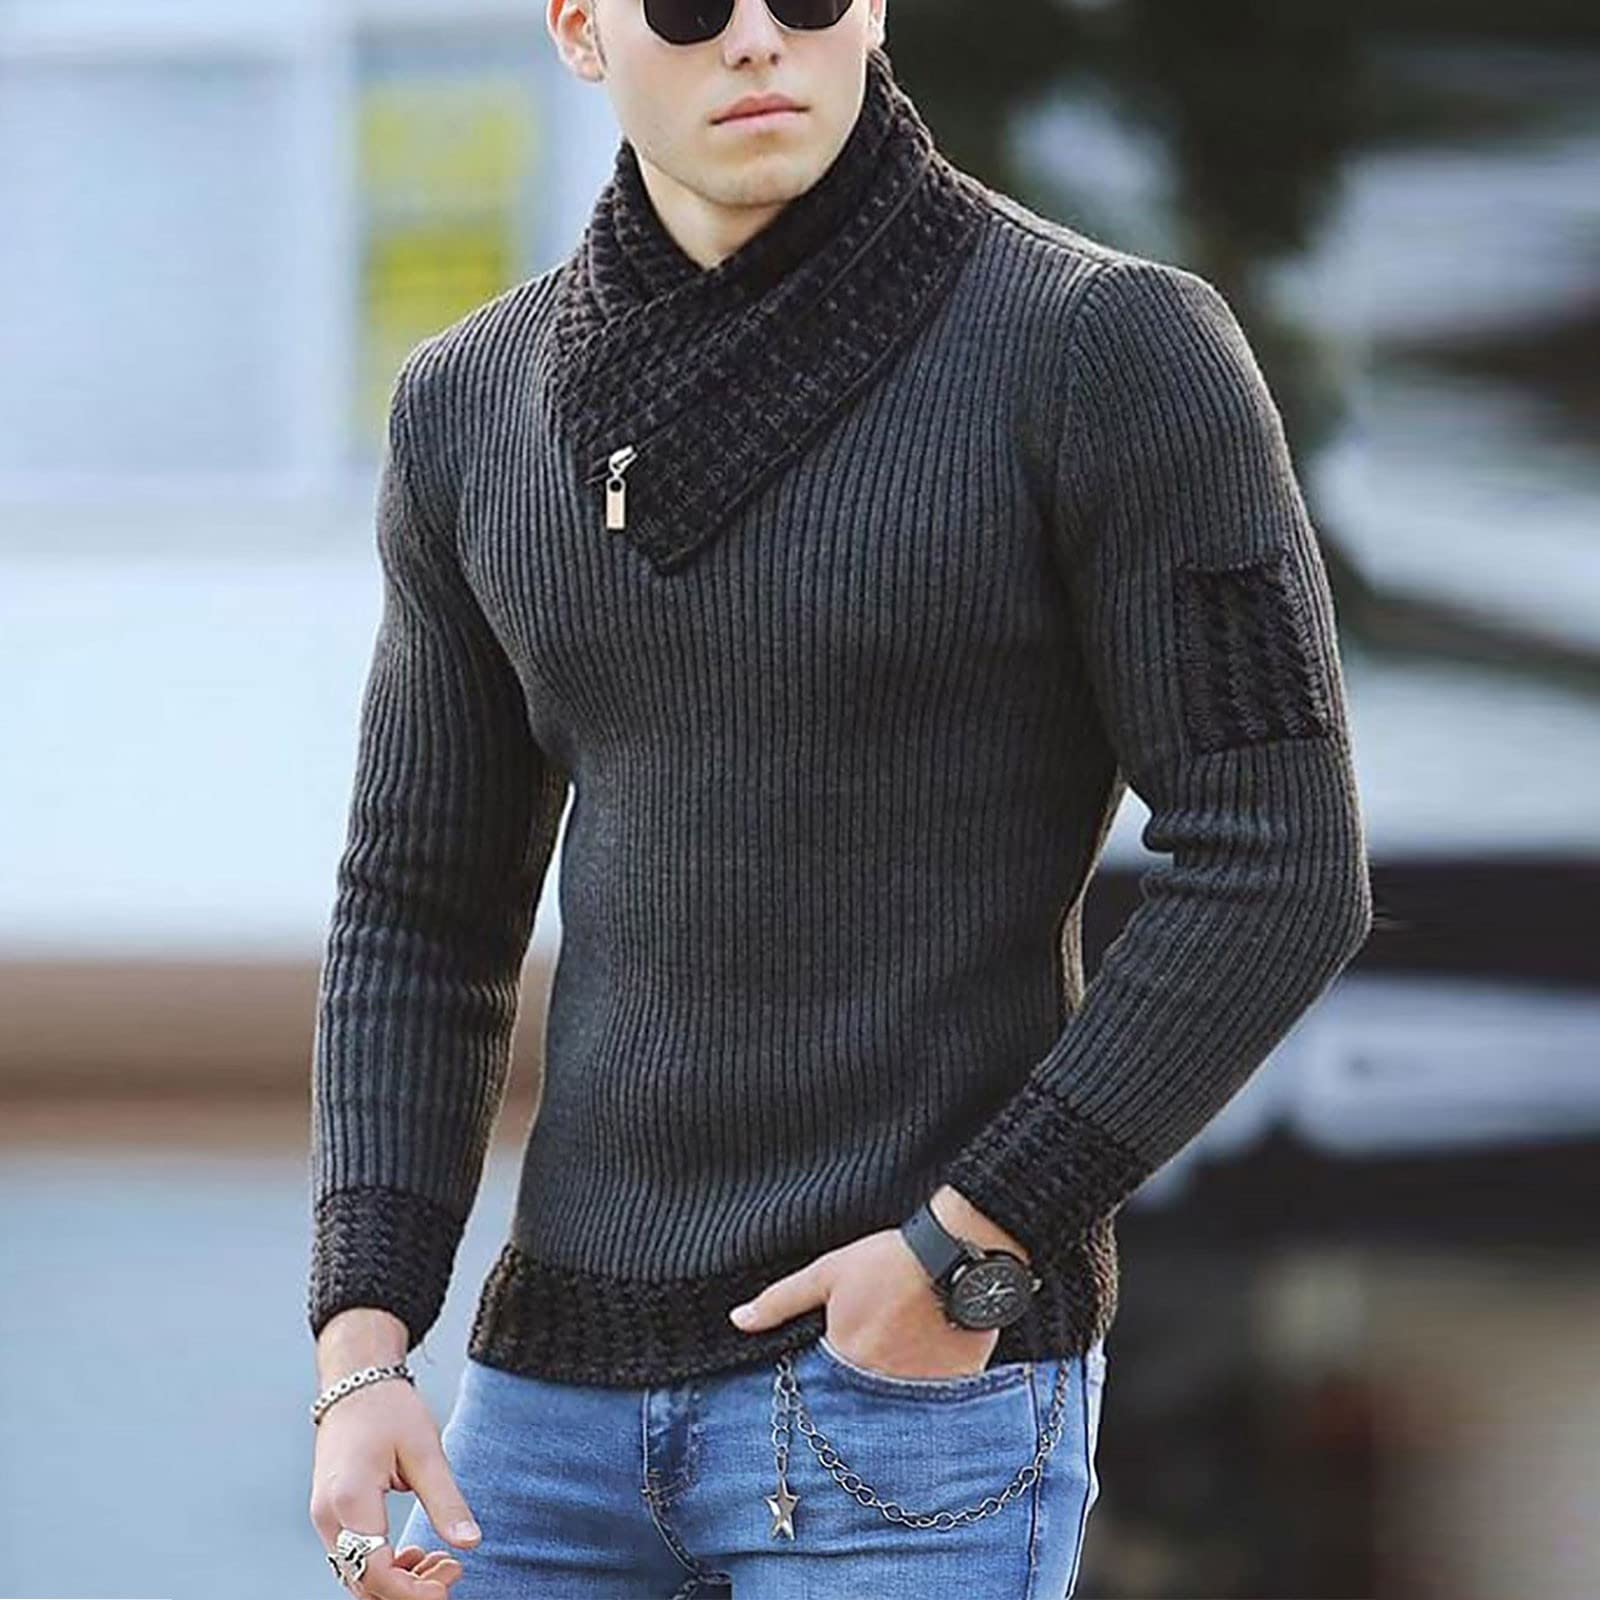 XIAXOGOOL Turtle Neck Sweaters for Men,Men Knitted Hoodies Pullover Casual Long Sleeve Turtleneck Sweaters with Drawstring